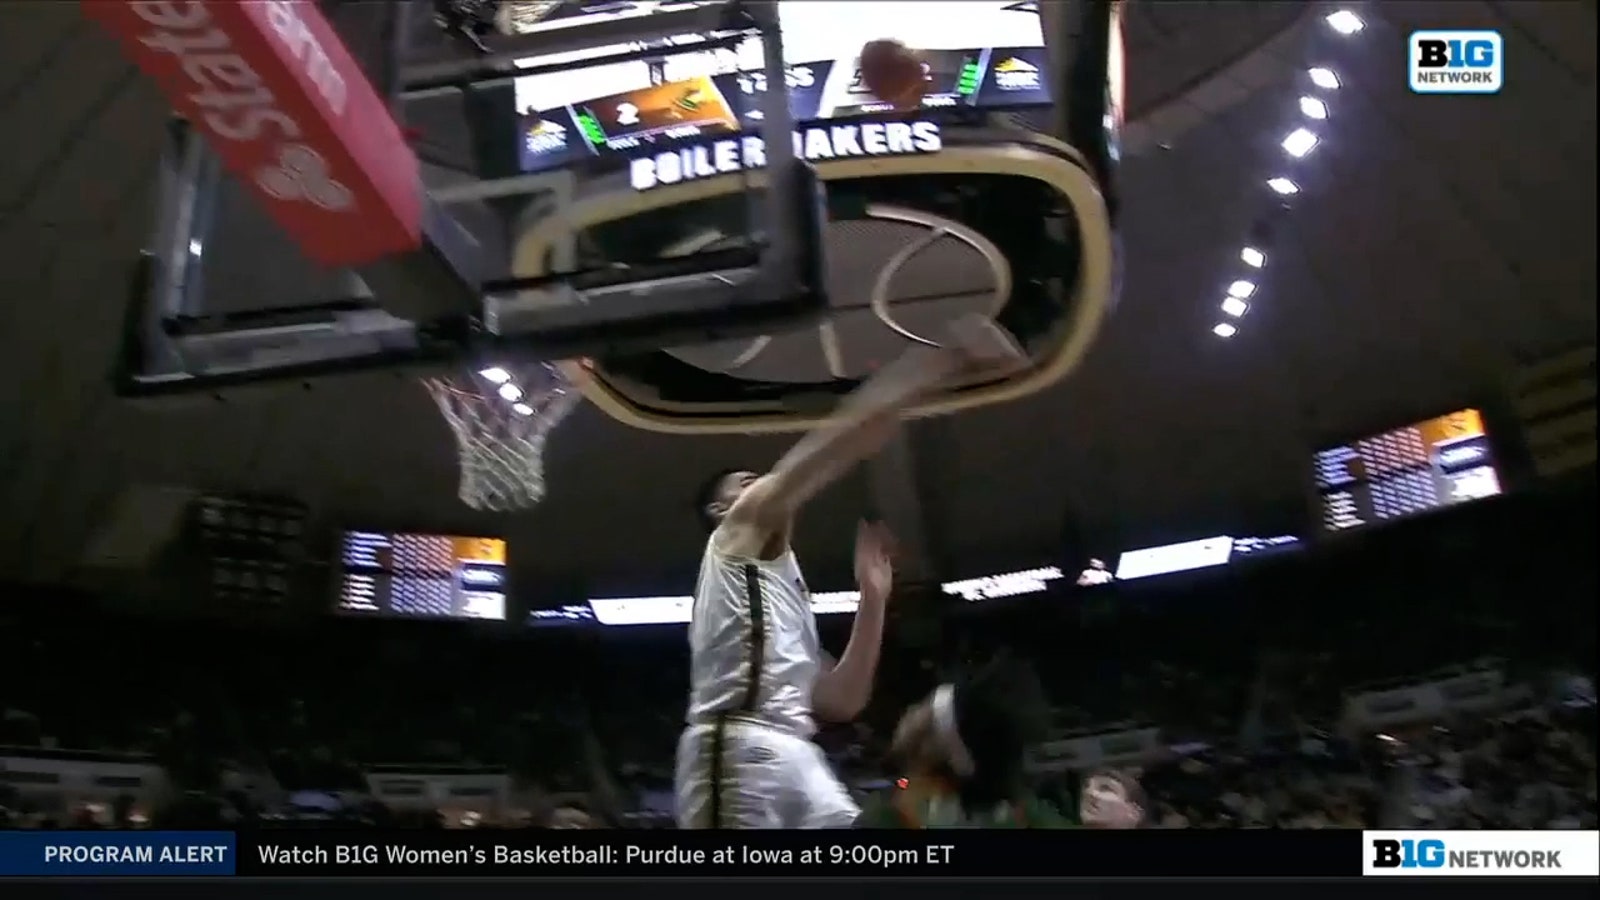 Purdue's Zach Edey slams home an alley-oop dunk and blocks a shot into the stands on the other end